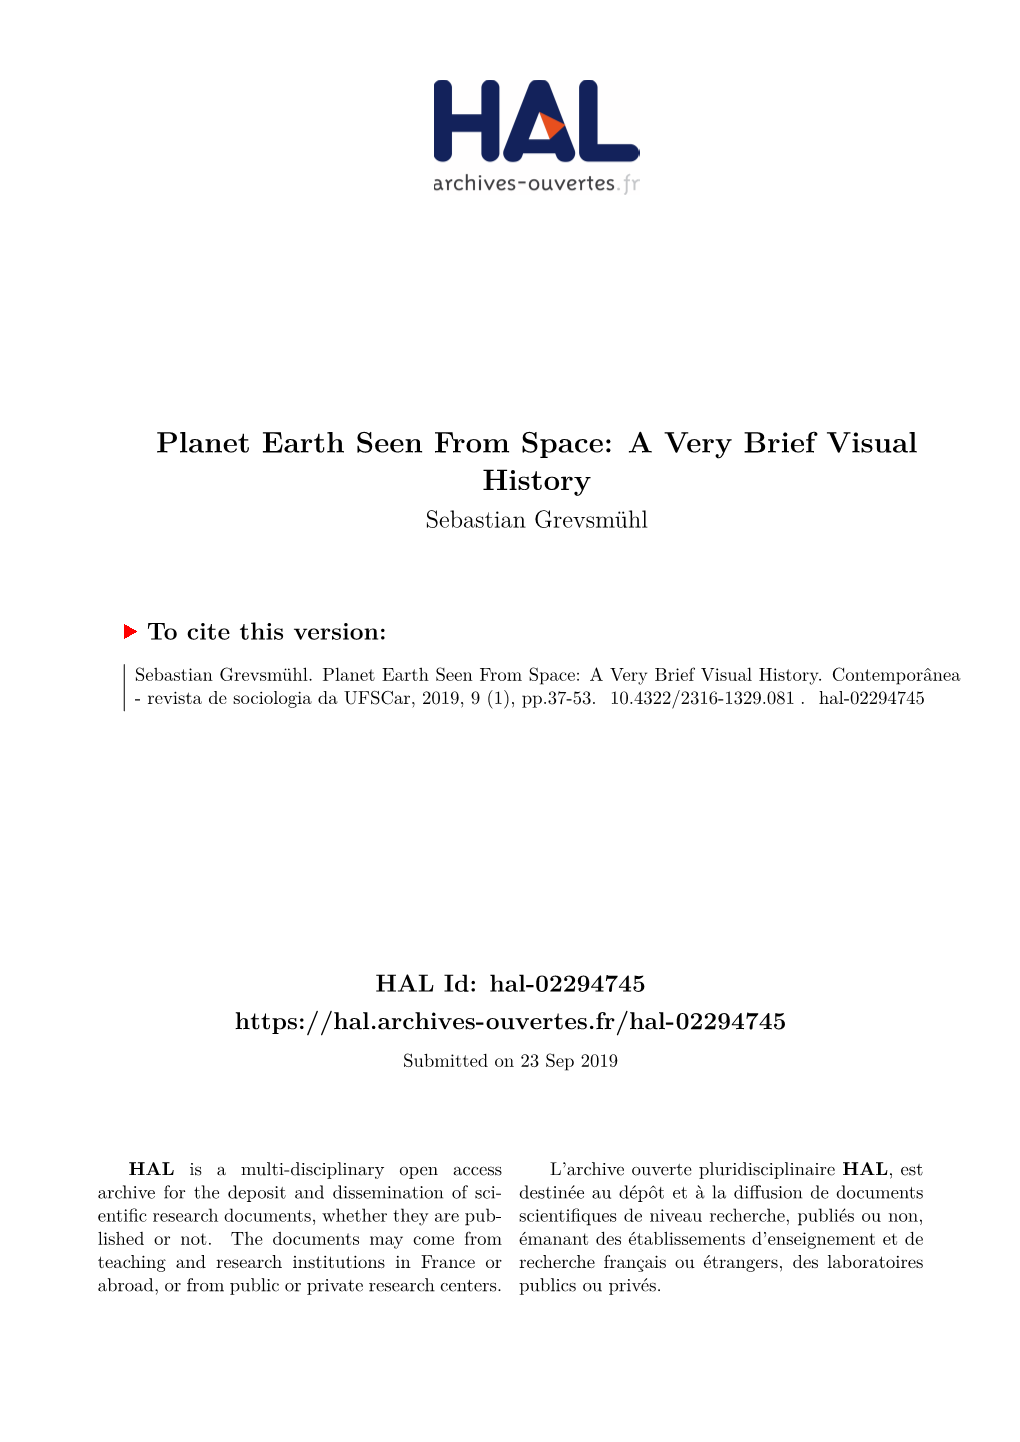 Planet Earth Seen from Space: a Very Brief Visual History Sebastian Grevsmühl